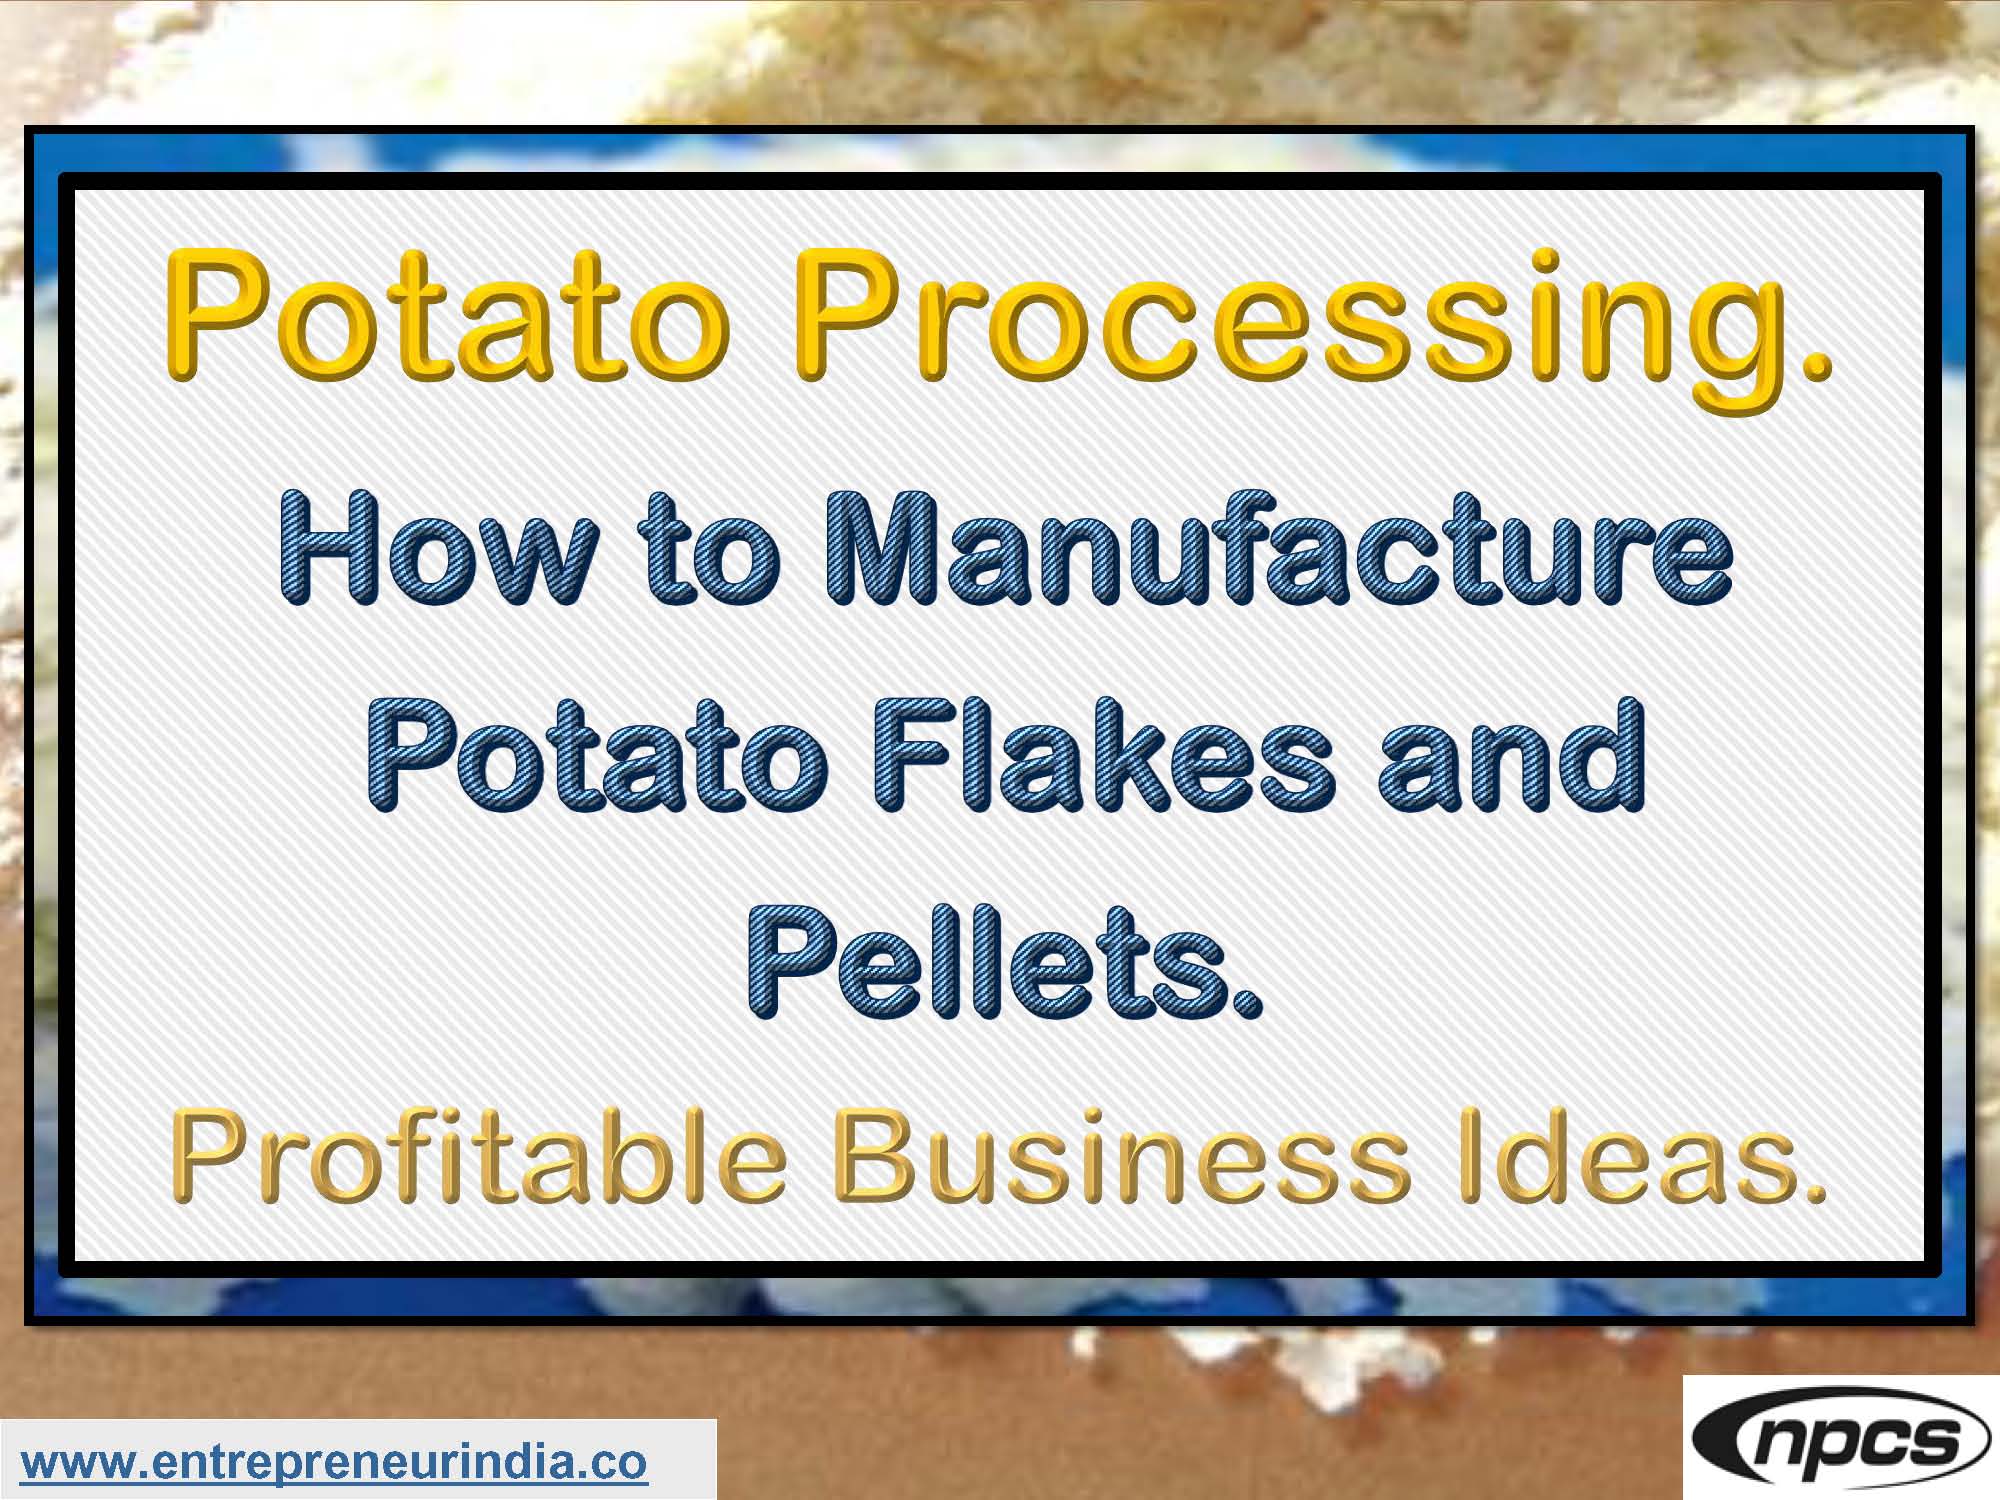 Potato Processing. How to Manufacture Potato Flakes and Pellets.jpg